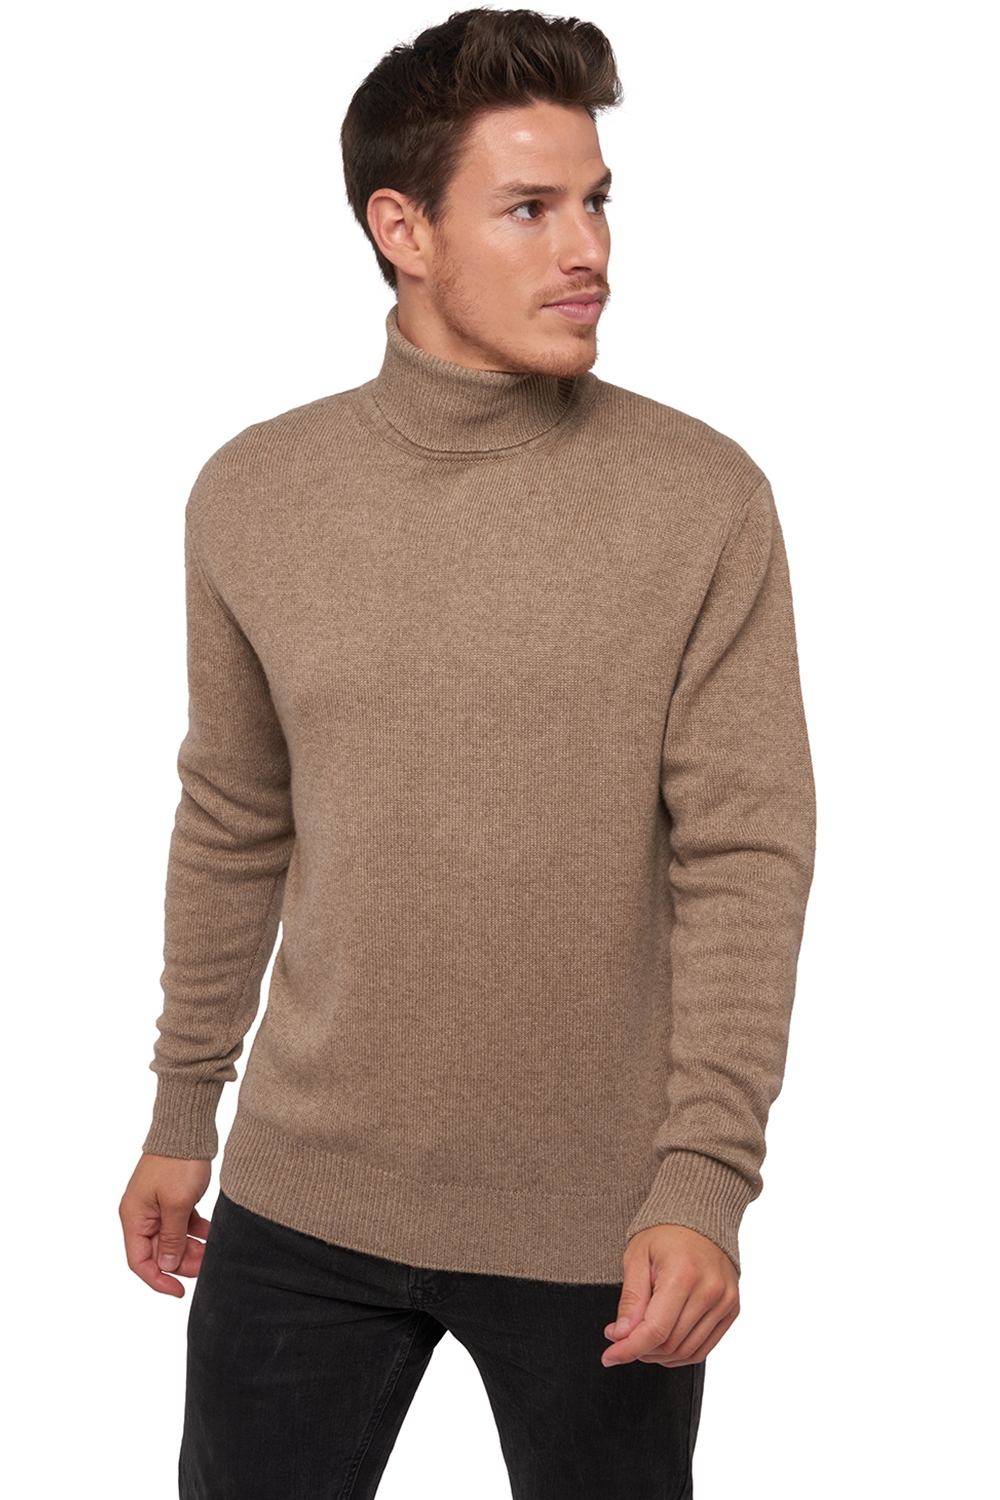 Cachemire pull homme les intemporels edgar 4f natural brown xs